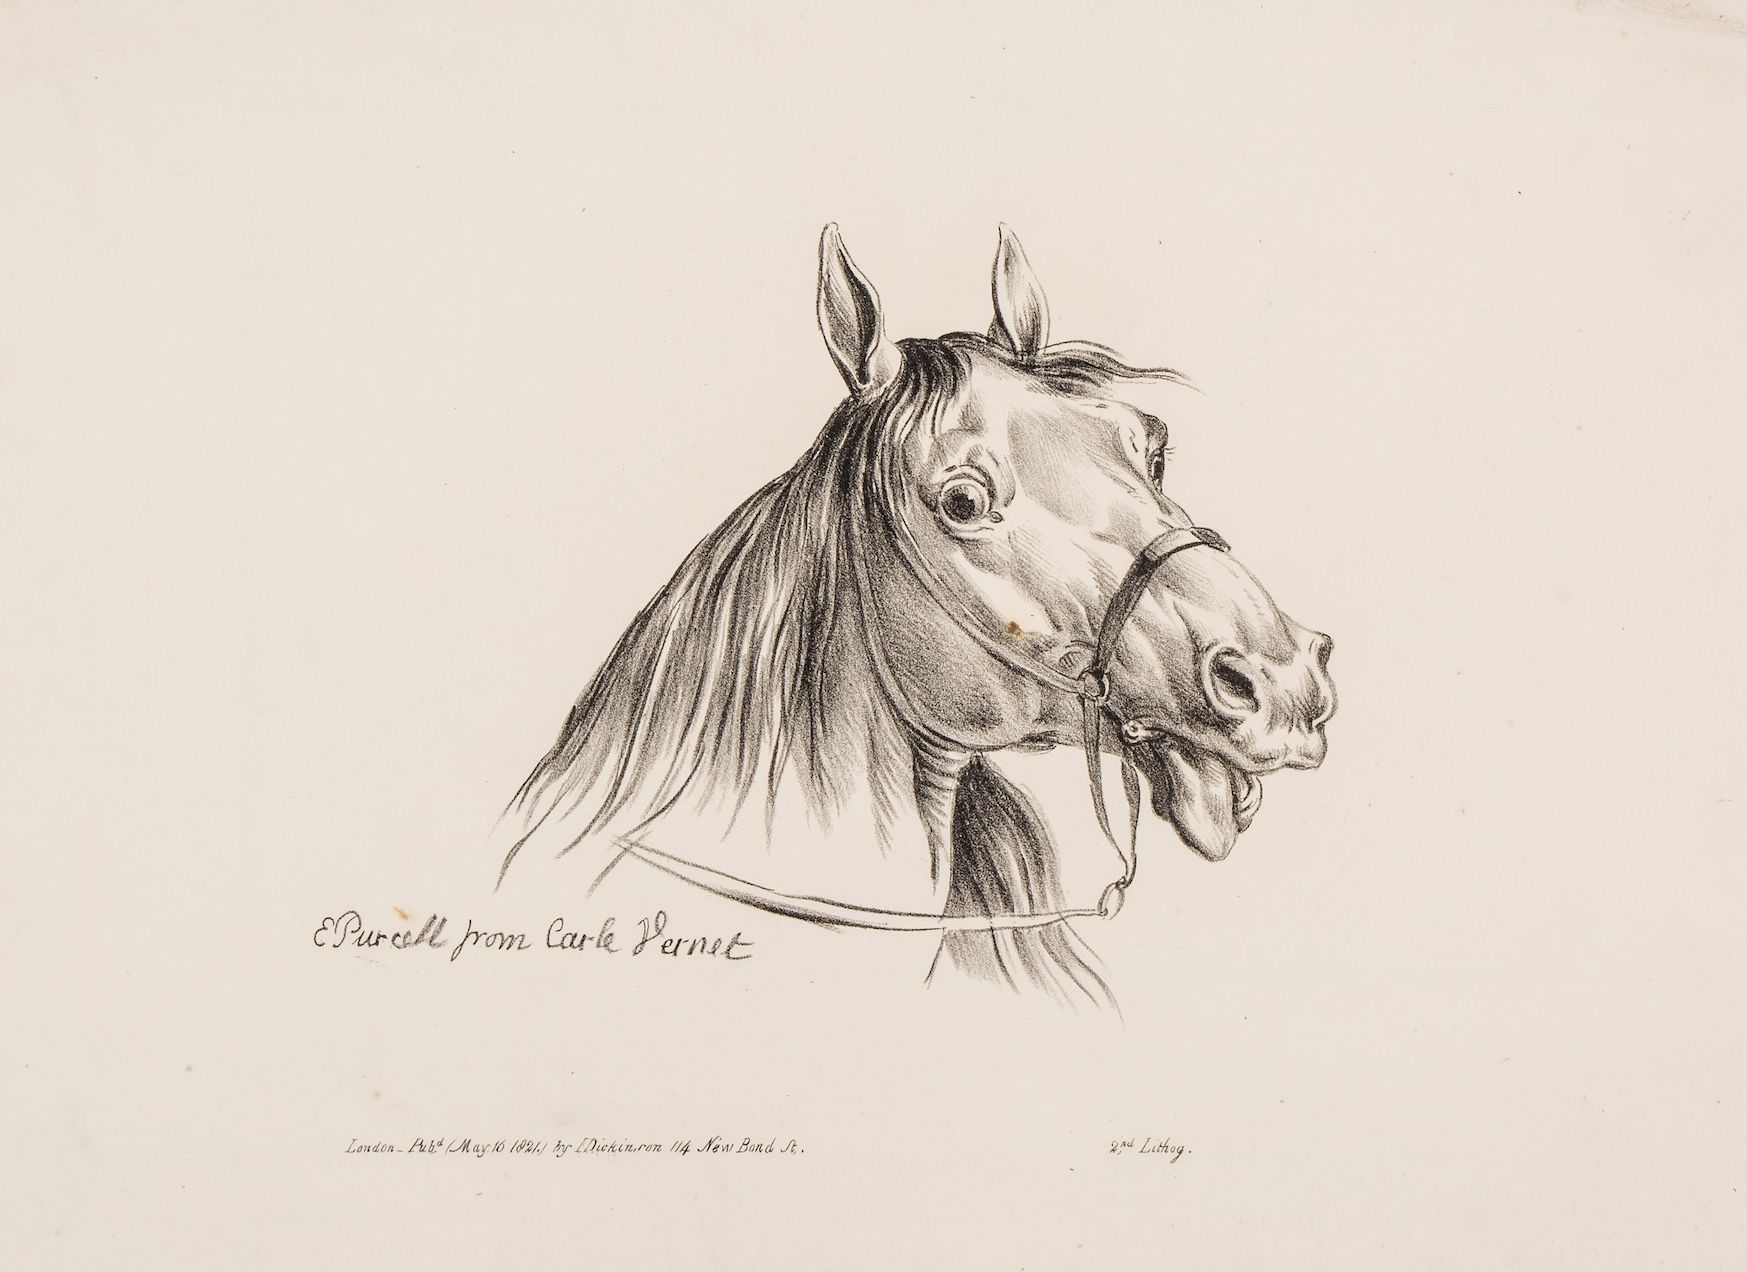 After Carle Vernet - A group of 17 studies of horses' heads, Lithographs, By E. Purcell, 1821, for - Image 2 of 3